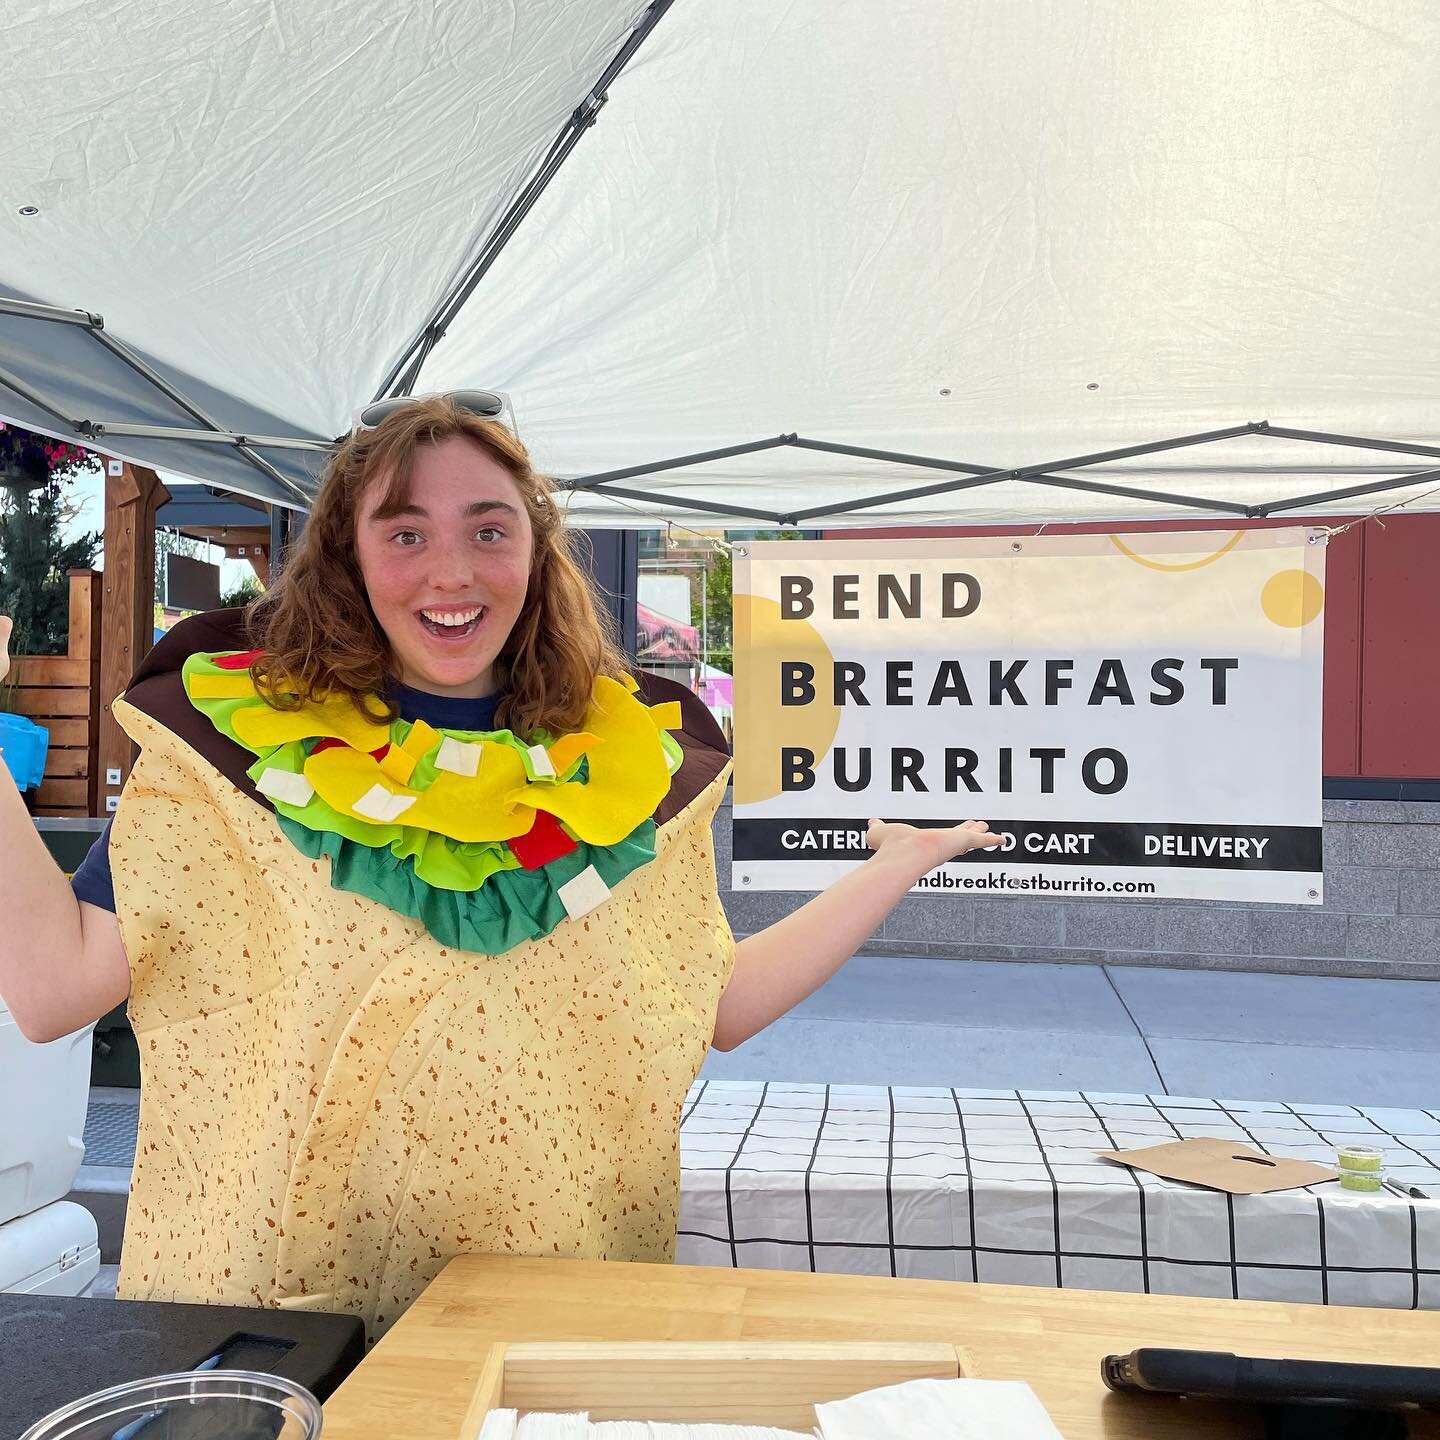 Find yourself someone who is as psyched about breakfast burritos as you are. 🌯 Huge thanks to our team member @madelinelivi for being so awesome!
.
.
.
#Bendbreakfastburrito #bendbreakfast #bendfood #bendfoodcarts #bendcatering #inbend #bendrestaura